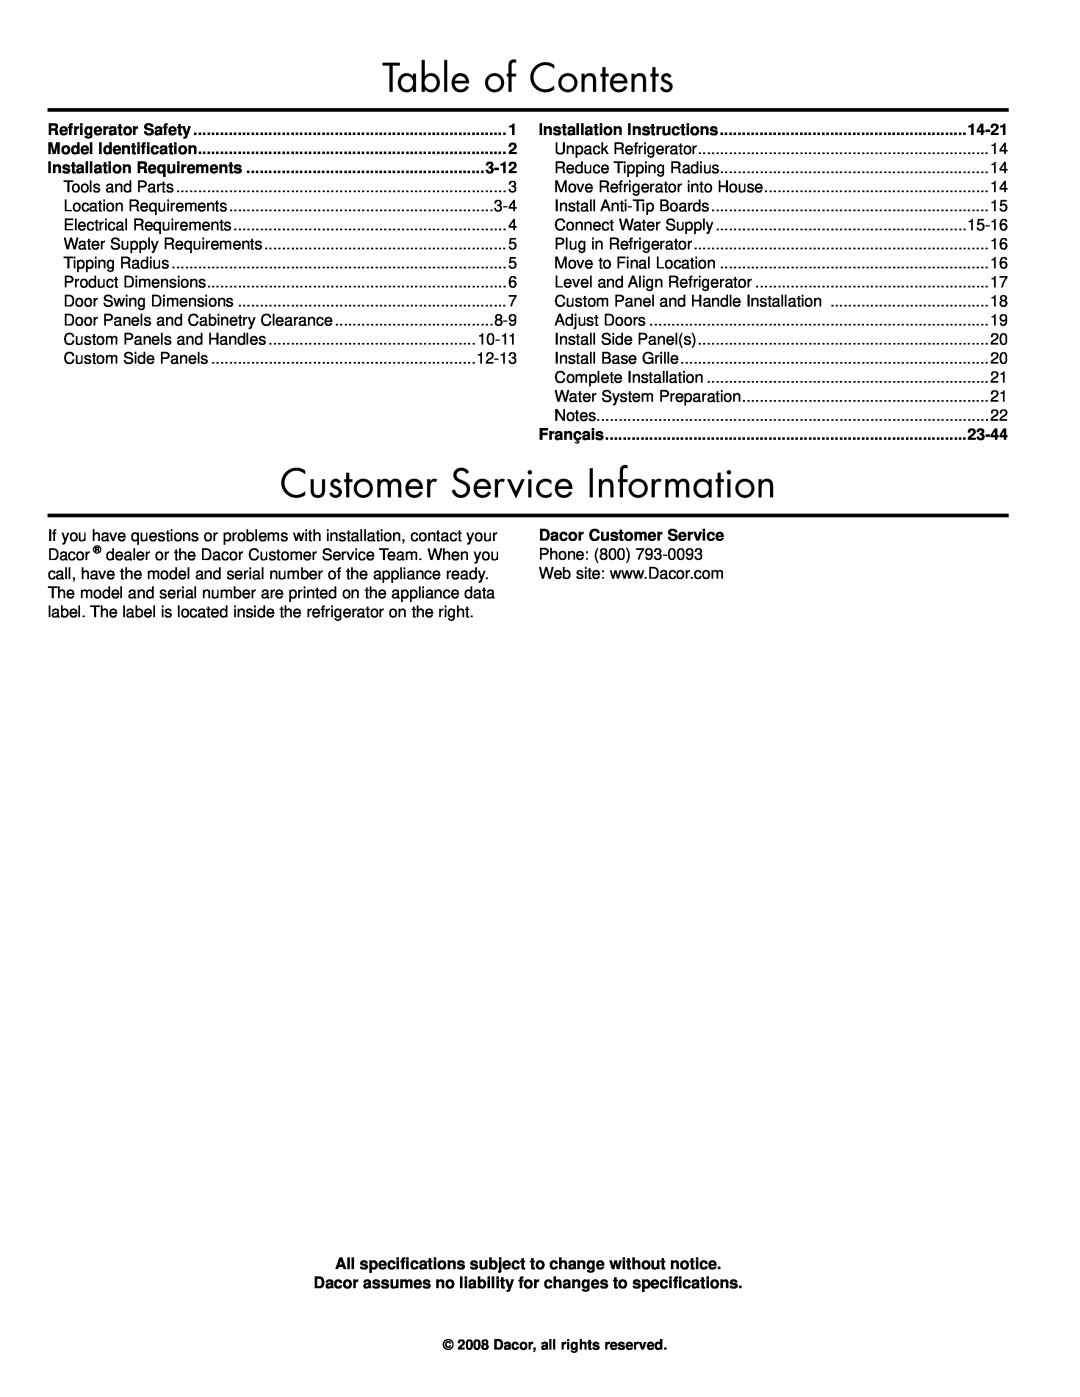 Dacor IF42DBOL manual Table of Contents, Customer Service Information, Refrigerator Safety, Installation Instructions, 3-12 